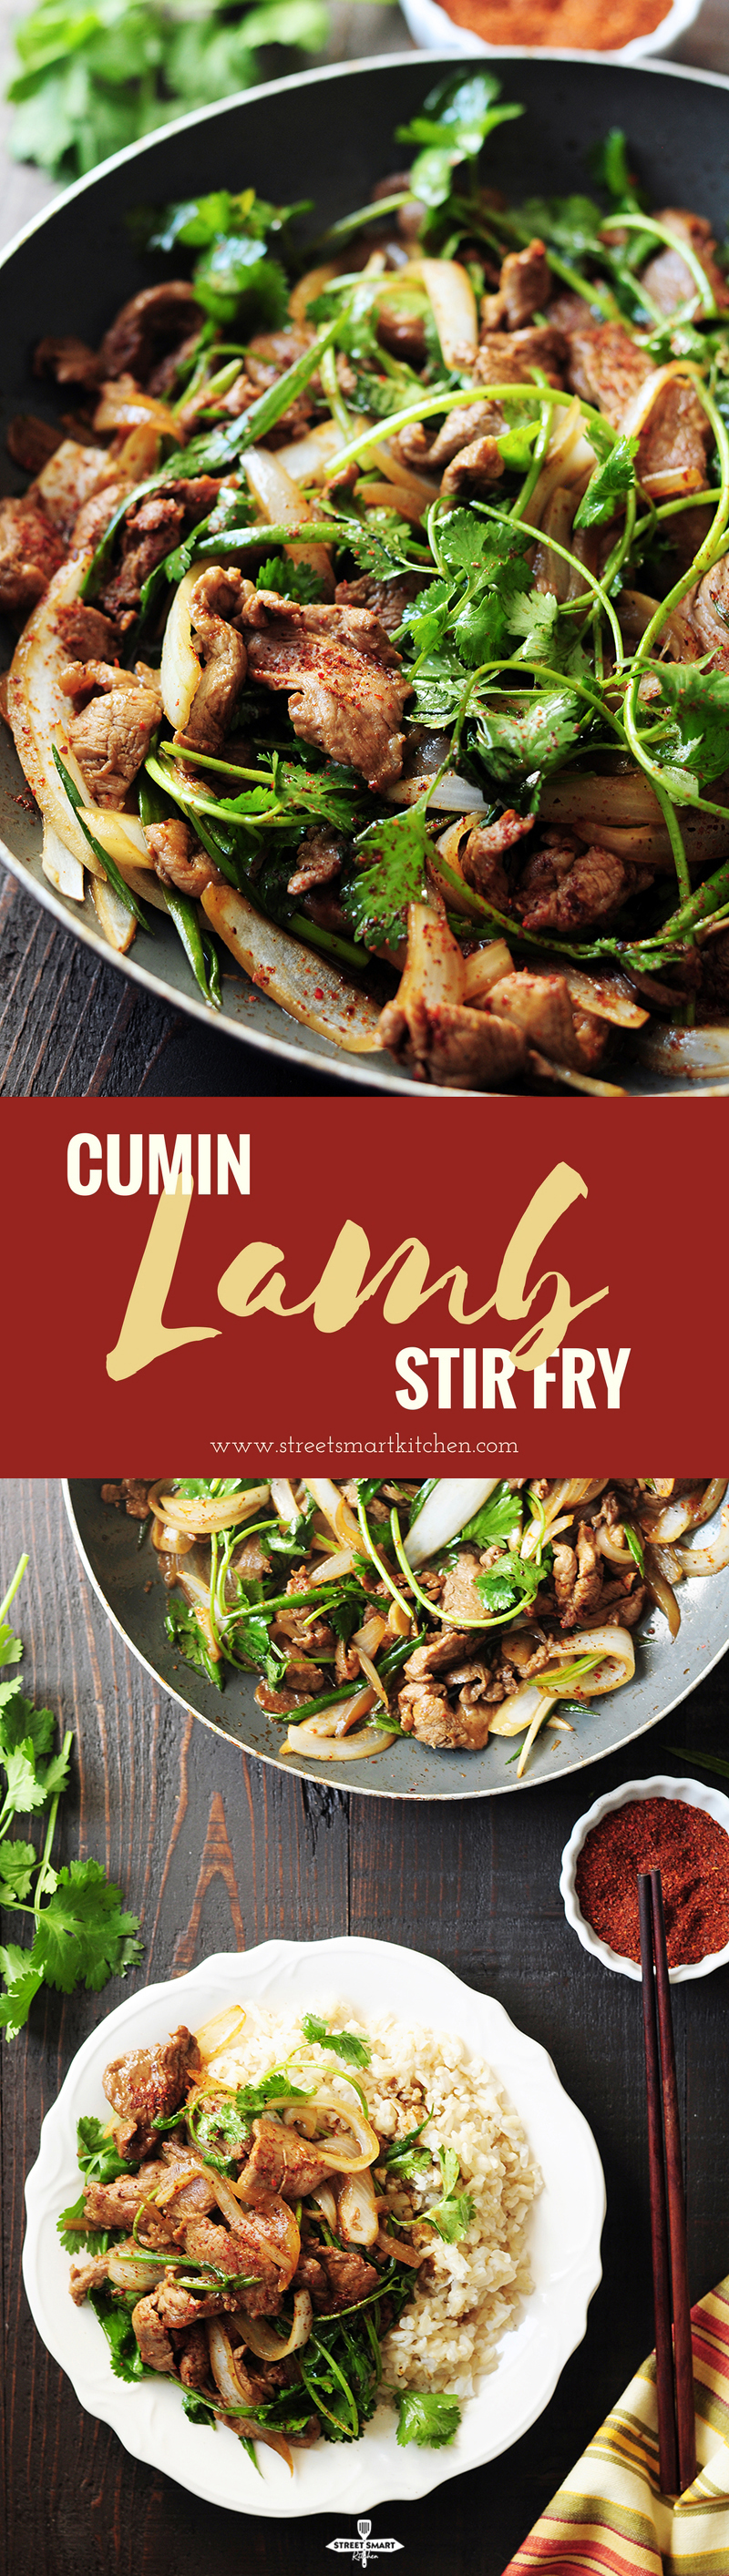 This authentic Chinese cumin lamb recipe takes less than 30 minutes to put together. It might just become your go-to lamb recipe after you try it.